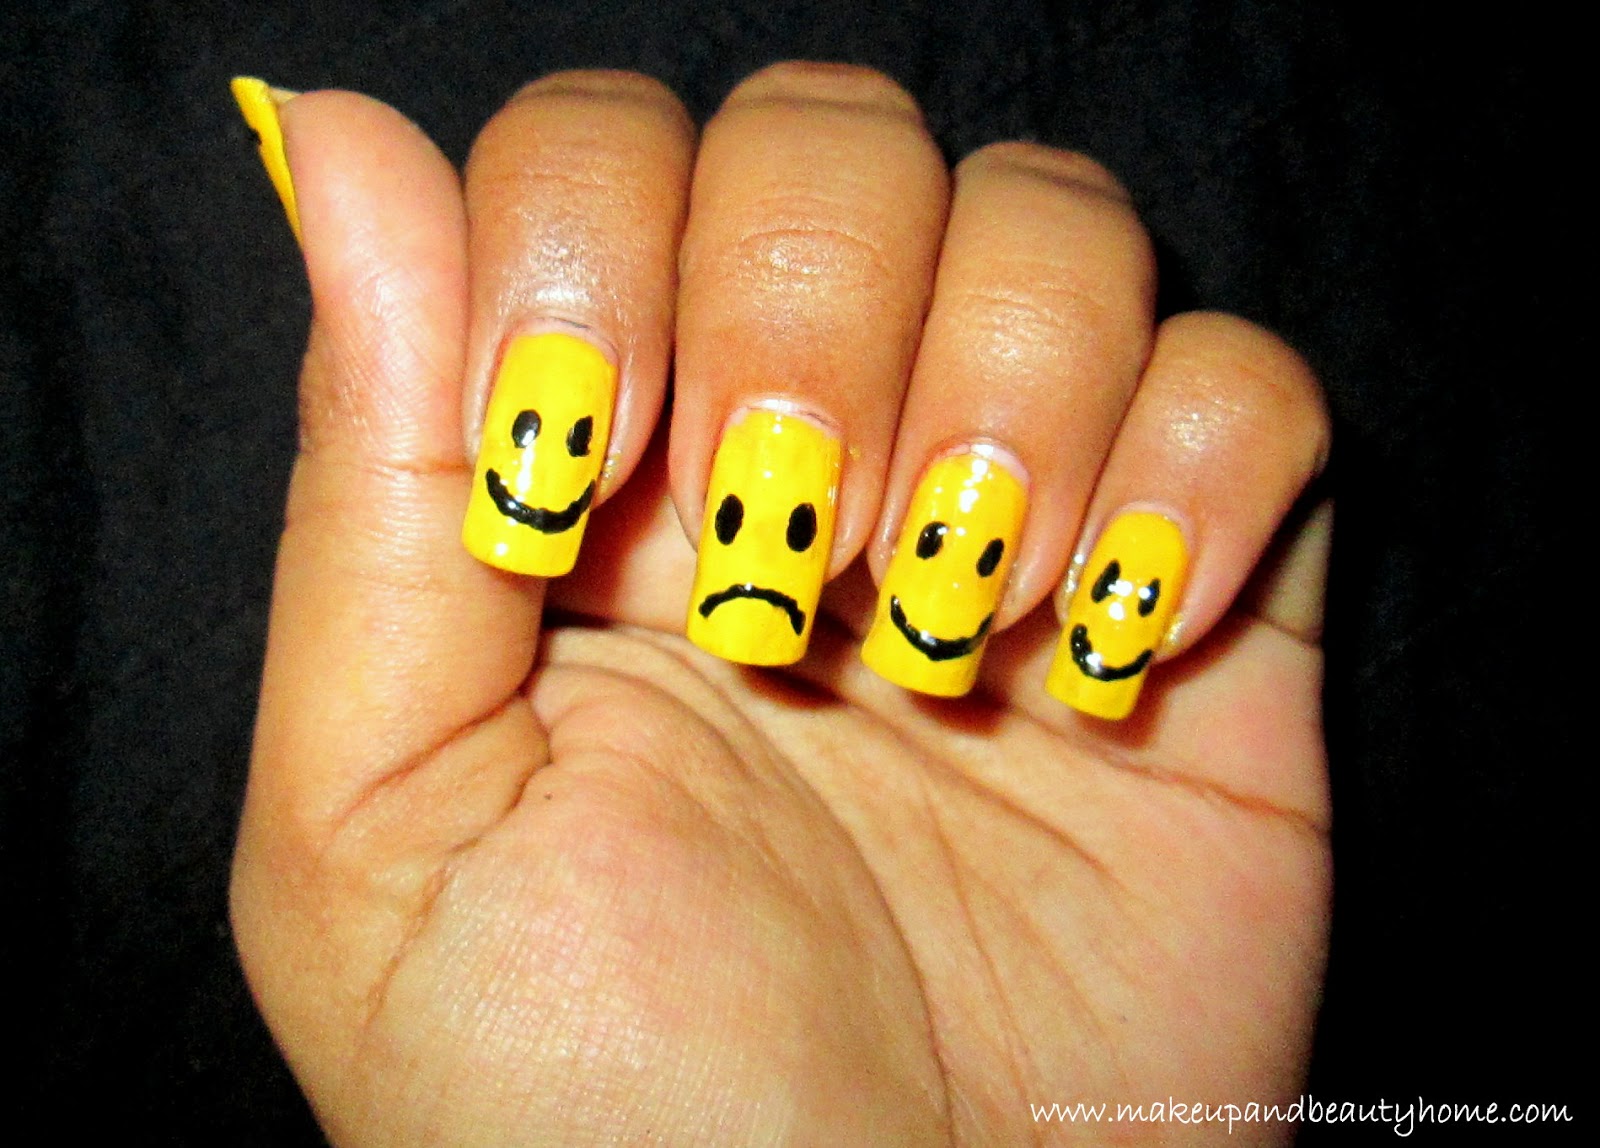 1. Melted Smiley Face Nail Art Tutorial - wide 2